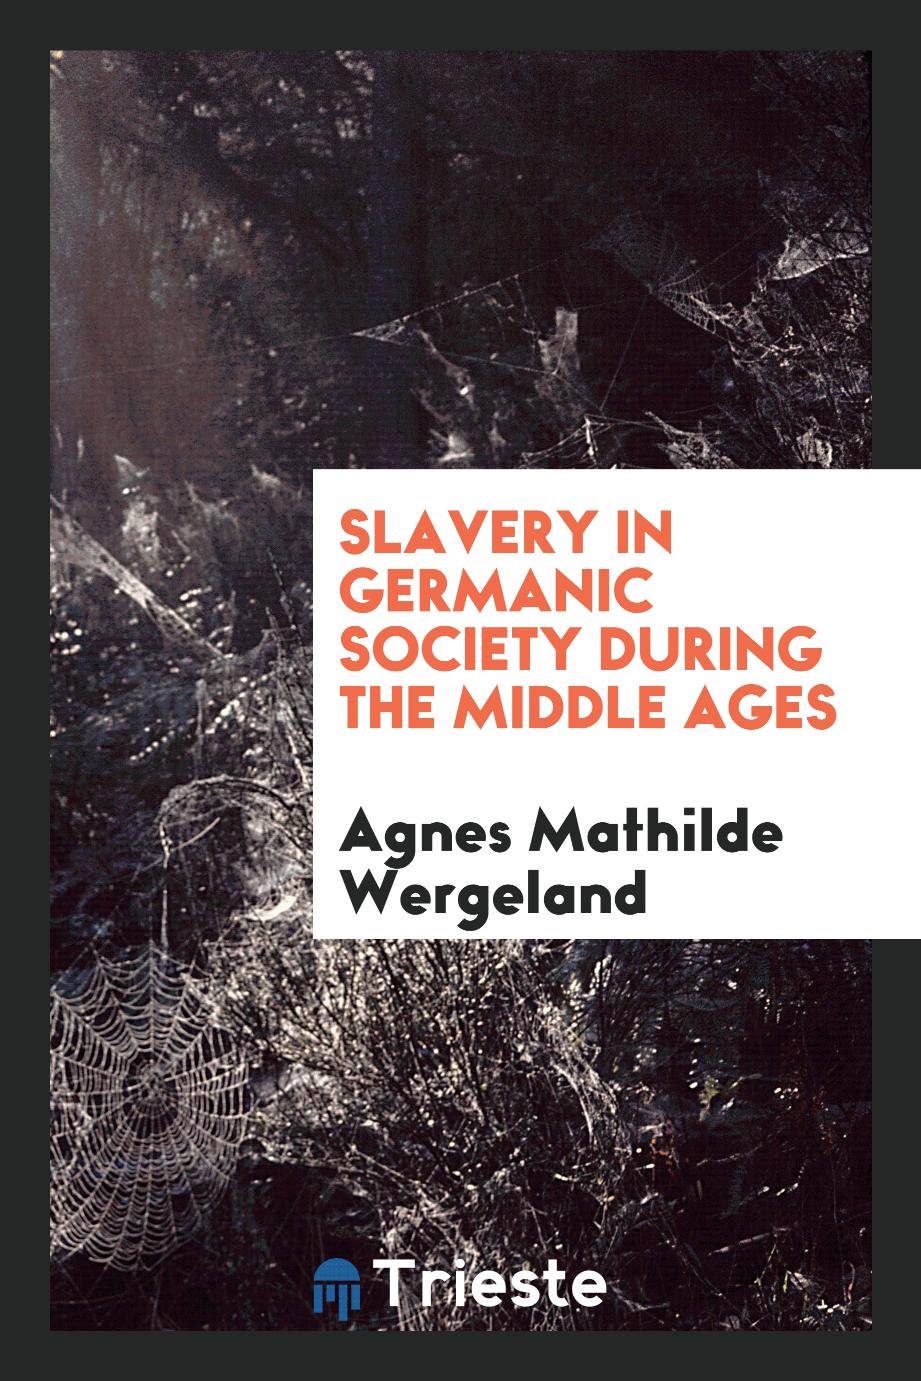 Slavery in Germanic Society During the Middle Ages